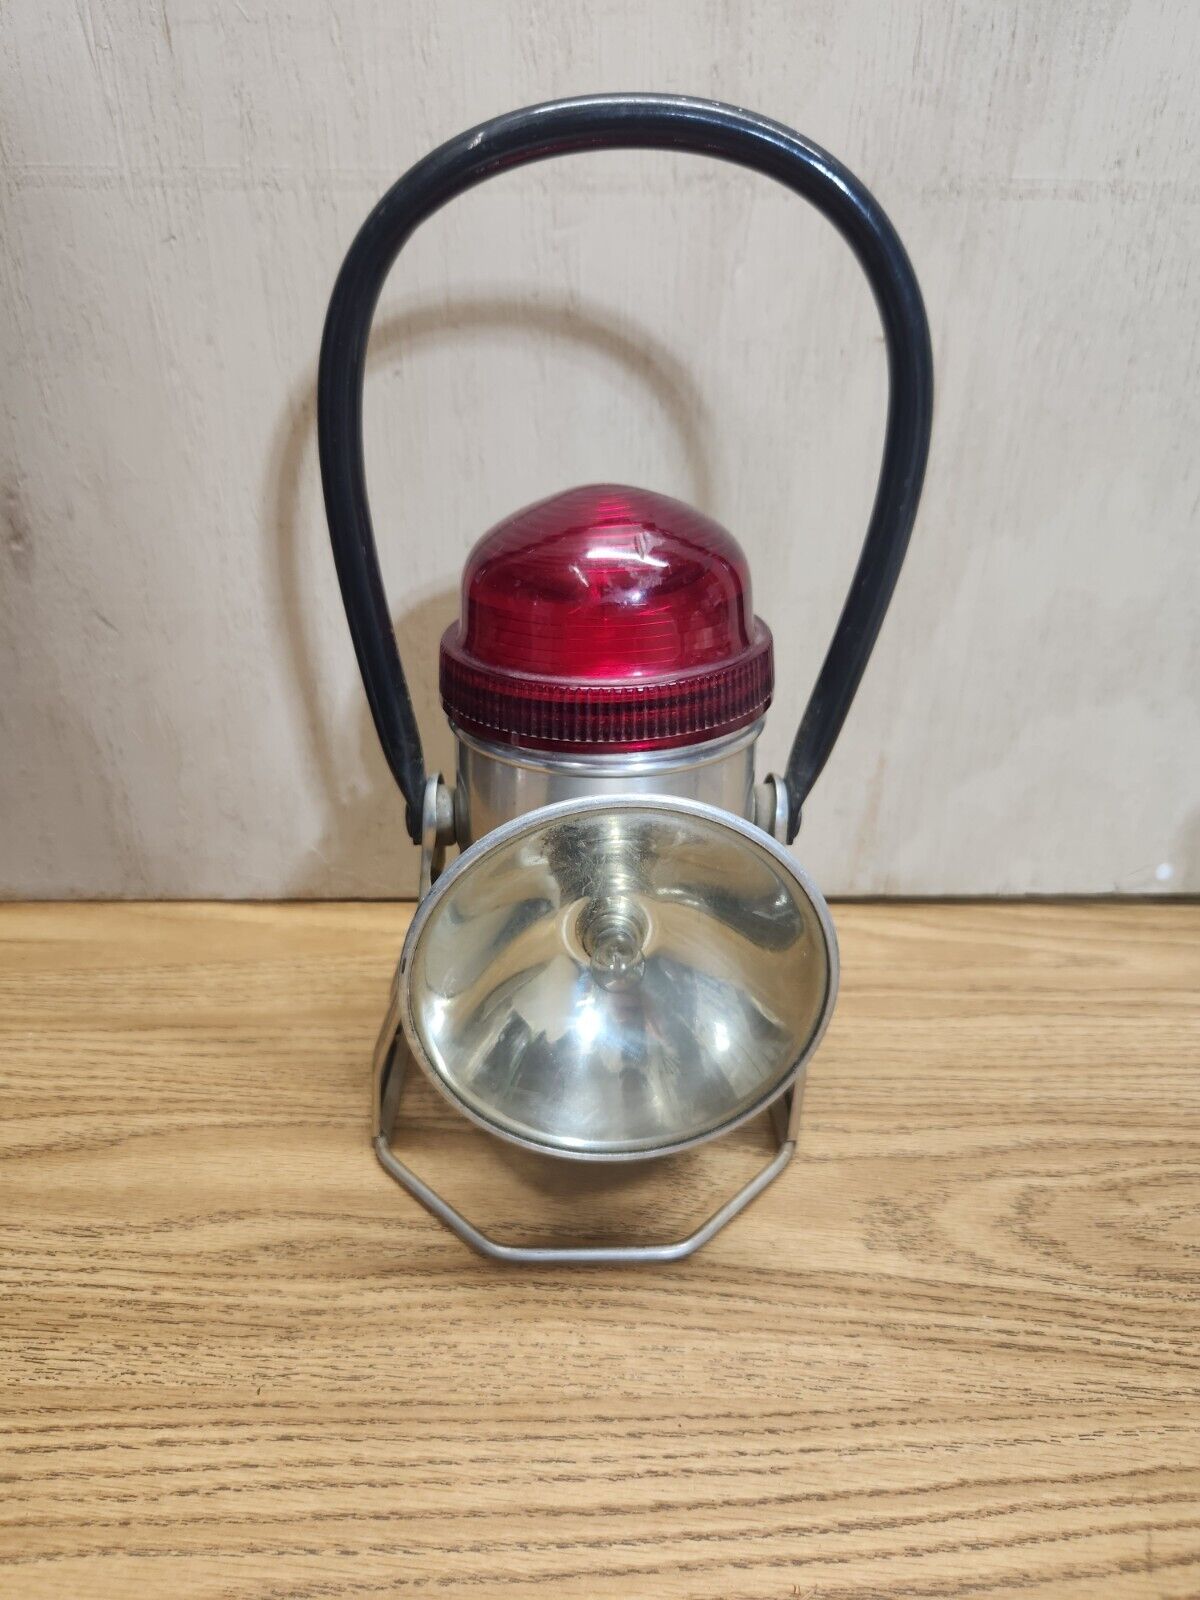 VTG Ecolite Lantern by Economy Electric Red Lens Railroad Mine Train conductor